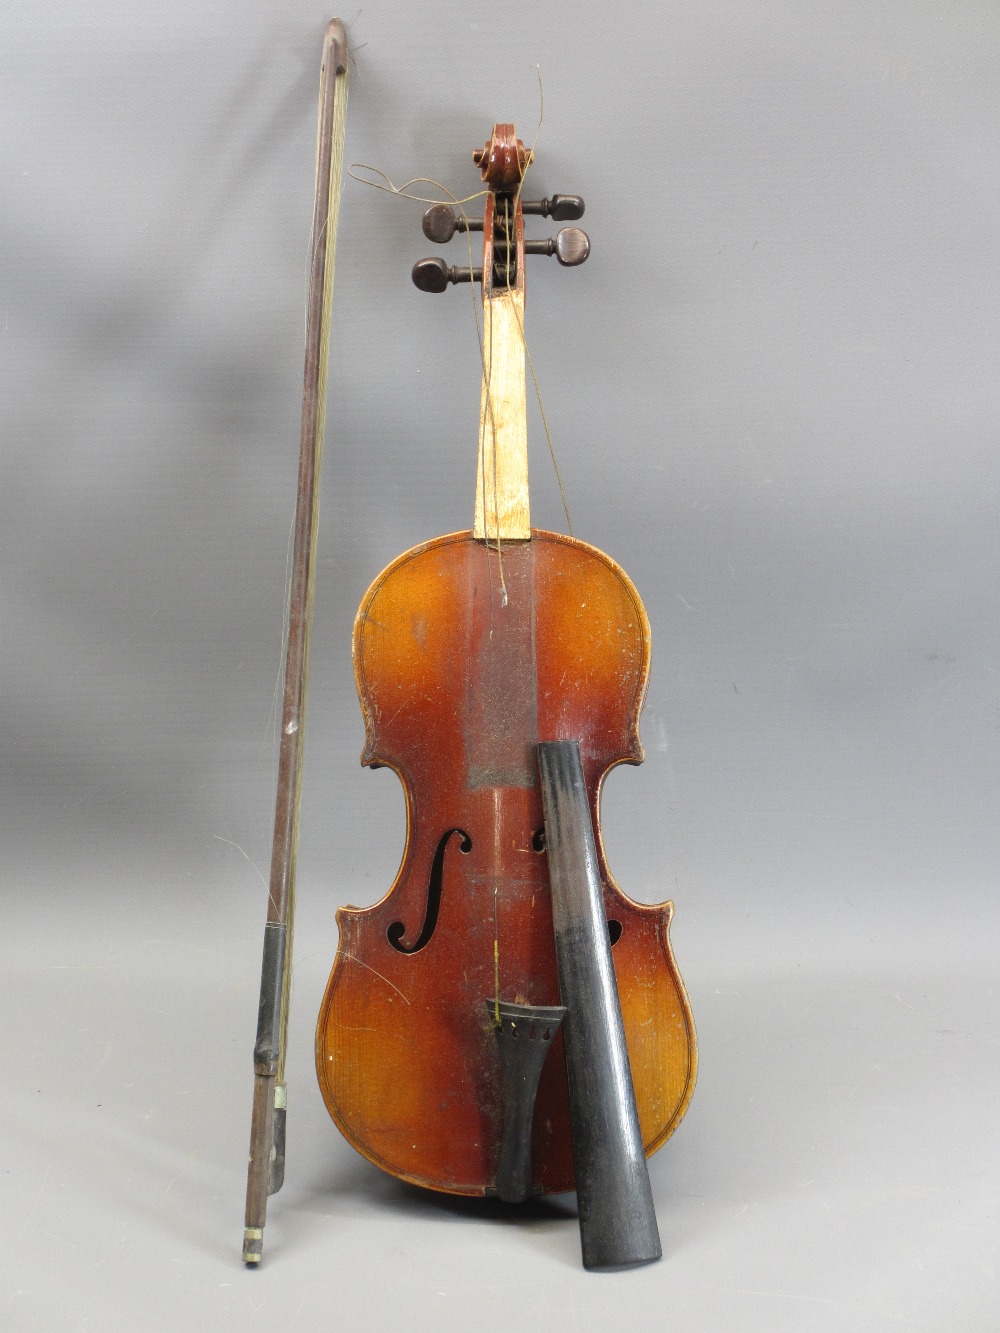 CASED WELL USED VINTAGE VIOLINS (2) - both bear interior labels, the first reads 'Nicolaus Amatus - Image 3 of 3